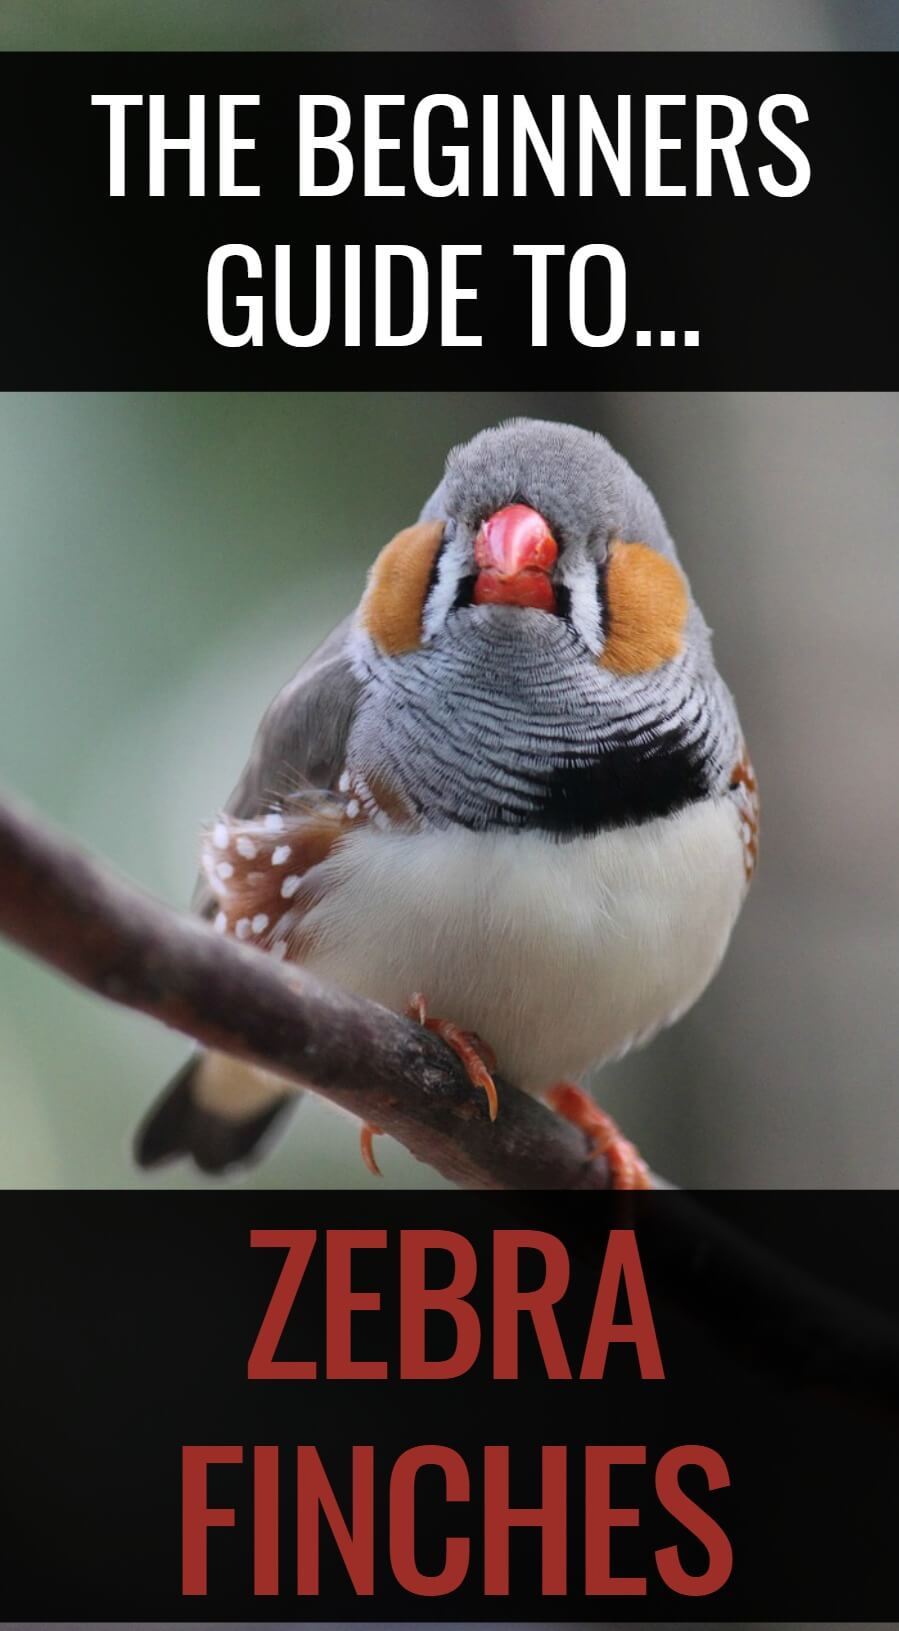 Wondering how to keep zebra finches? These stunning little birds are easy to keep as pets when you follow these simple steps to success...